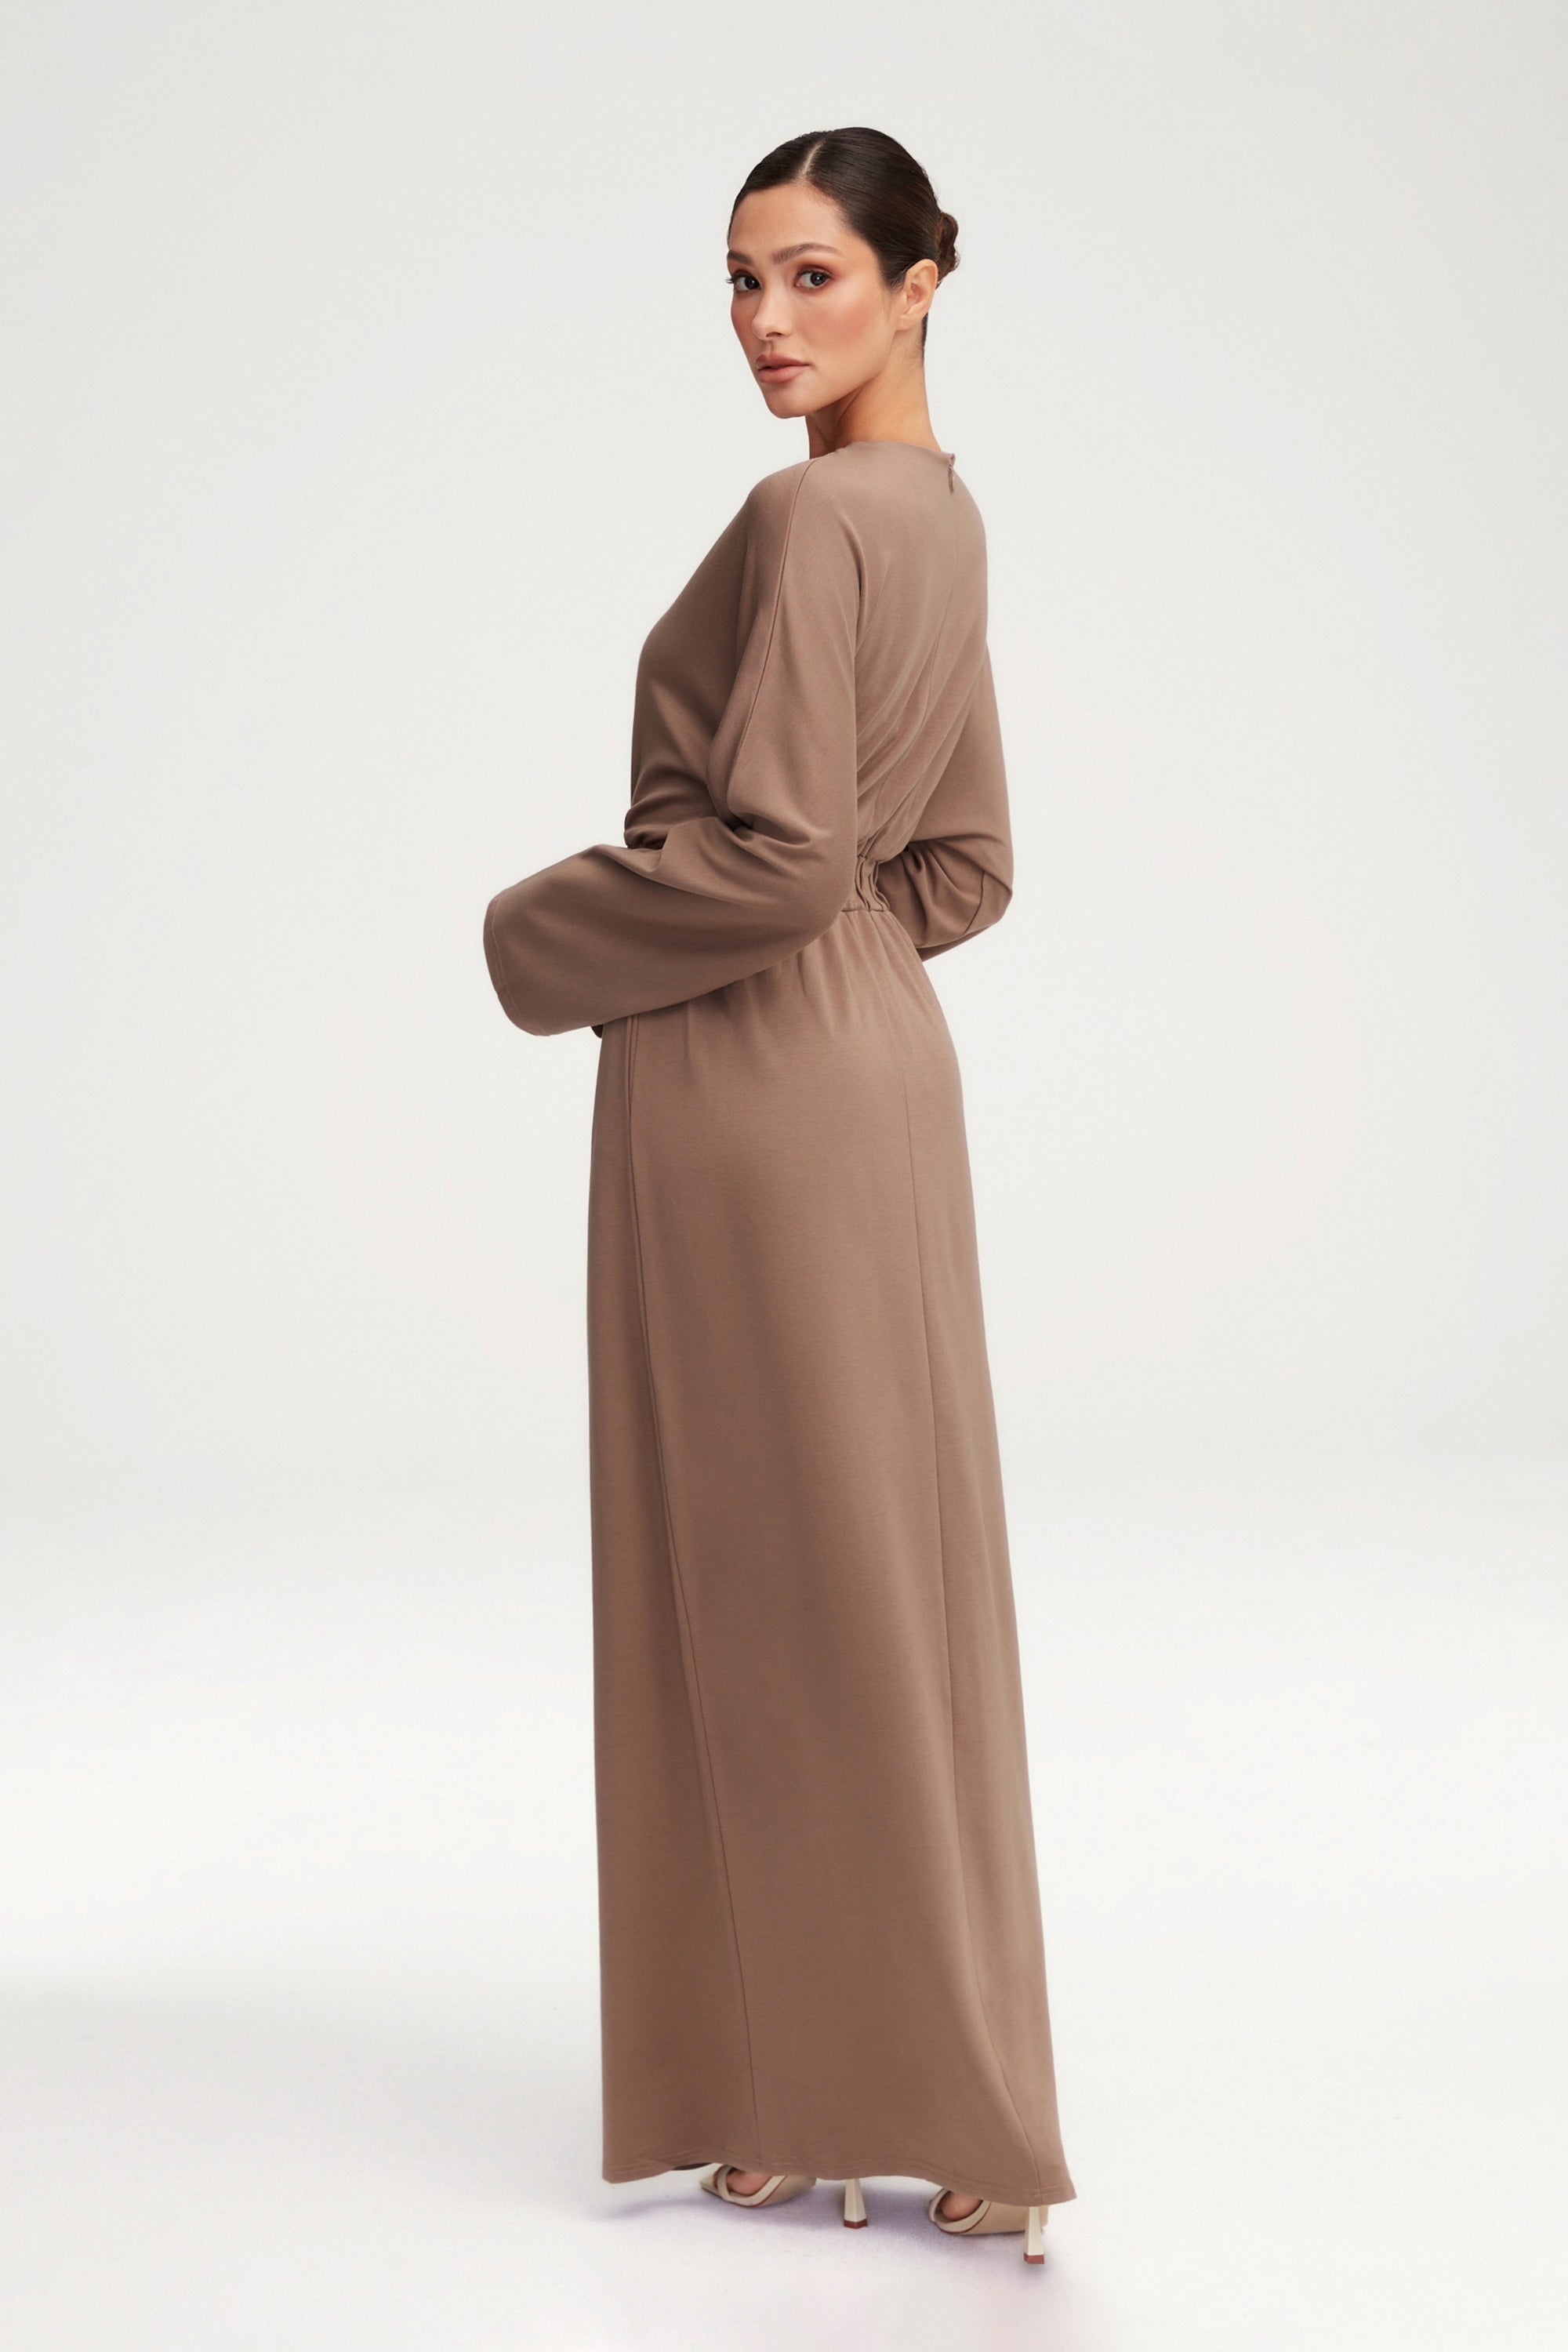 Adelynn Jersey Batwing Maxi Dress - Taupe Clothing Veiled 